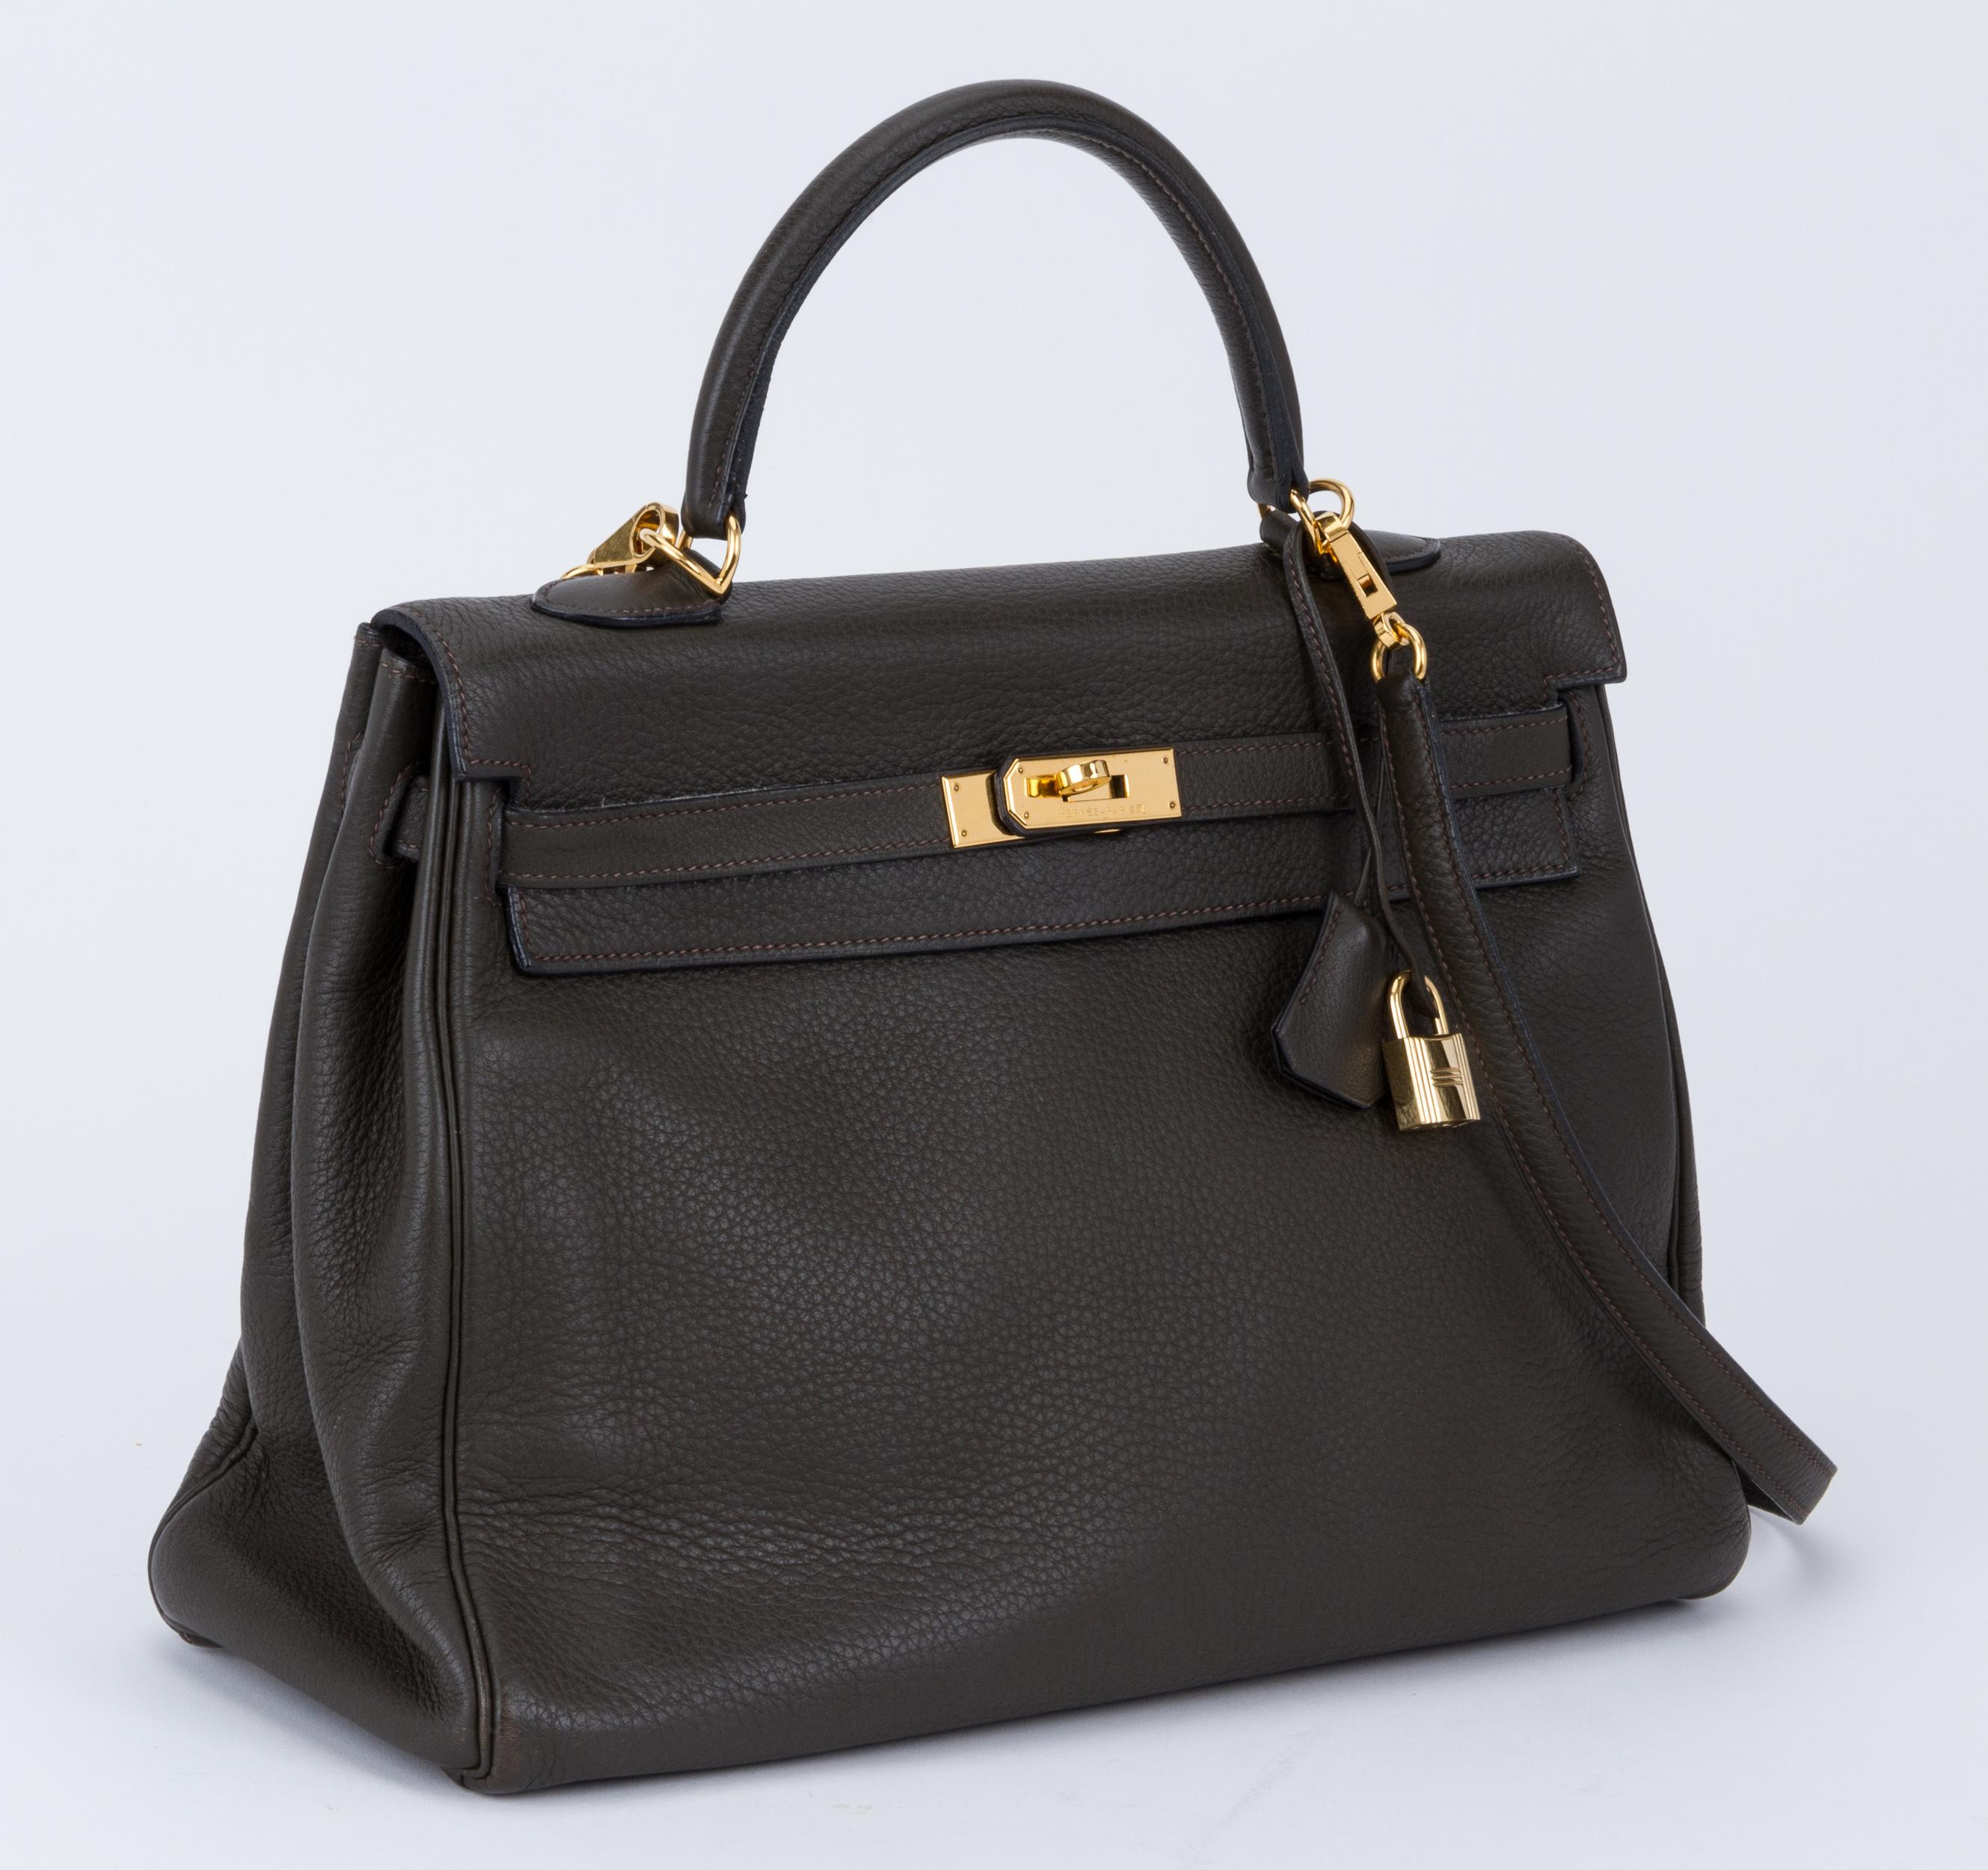 Hermes kelly bag 35 cm retourne in olive green clemence leather and gold tone hardware. Detachable strap, 35